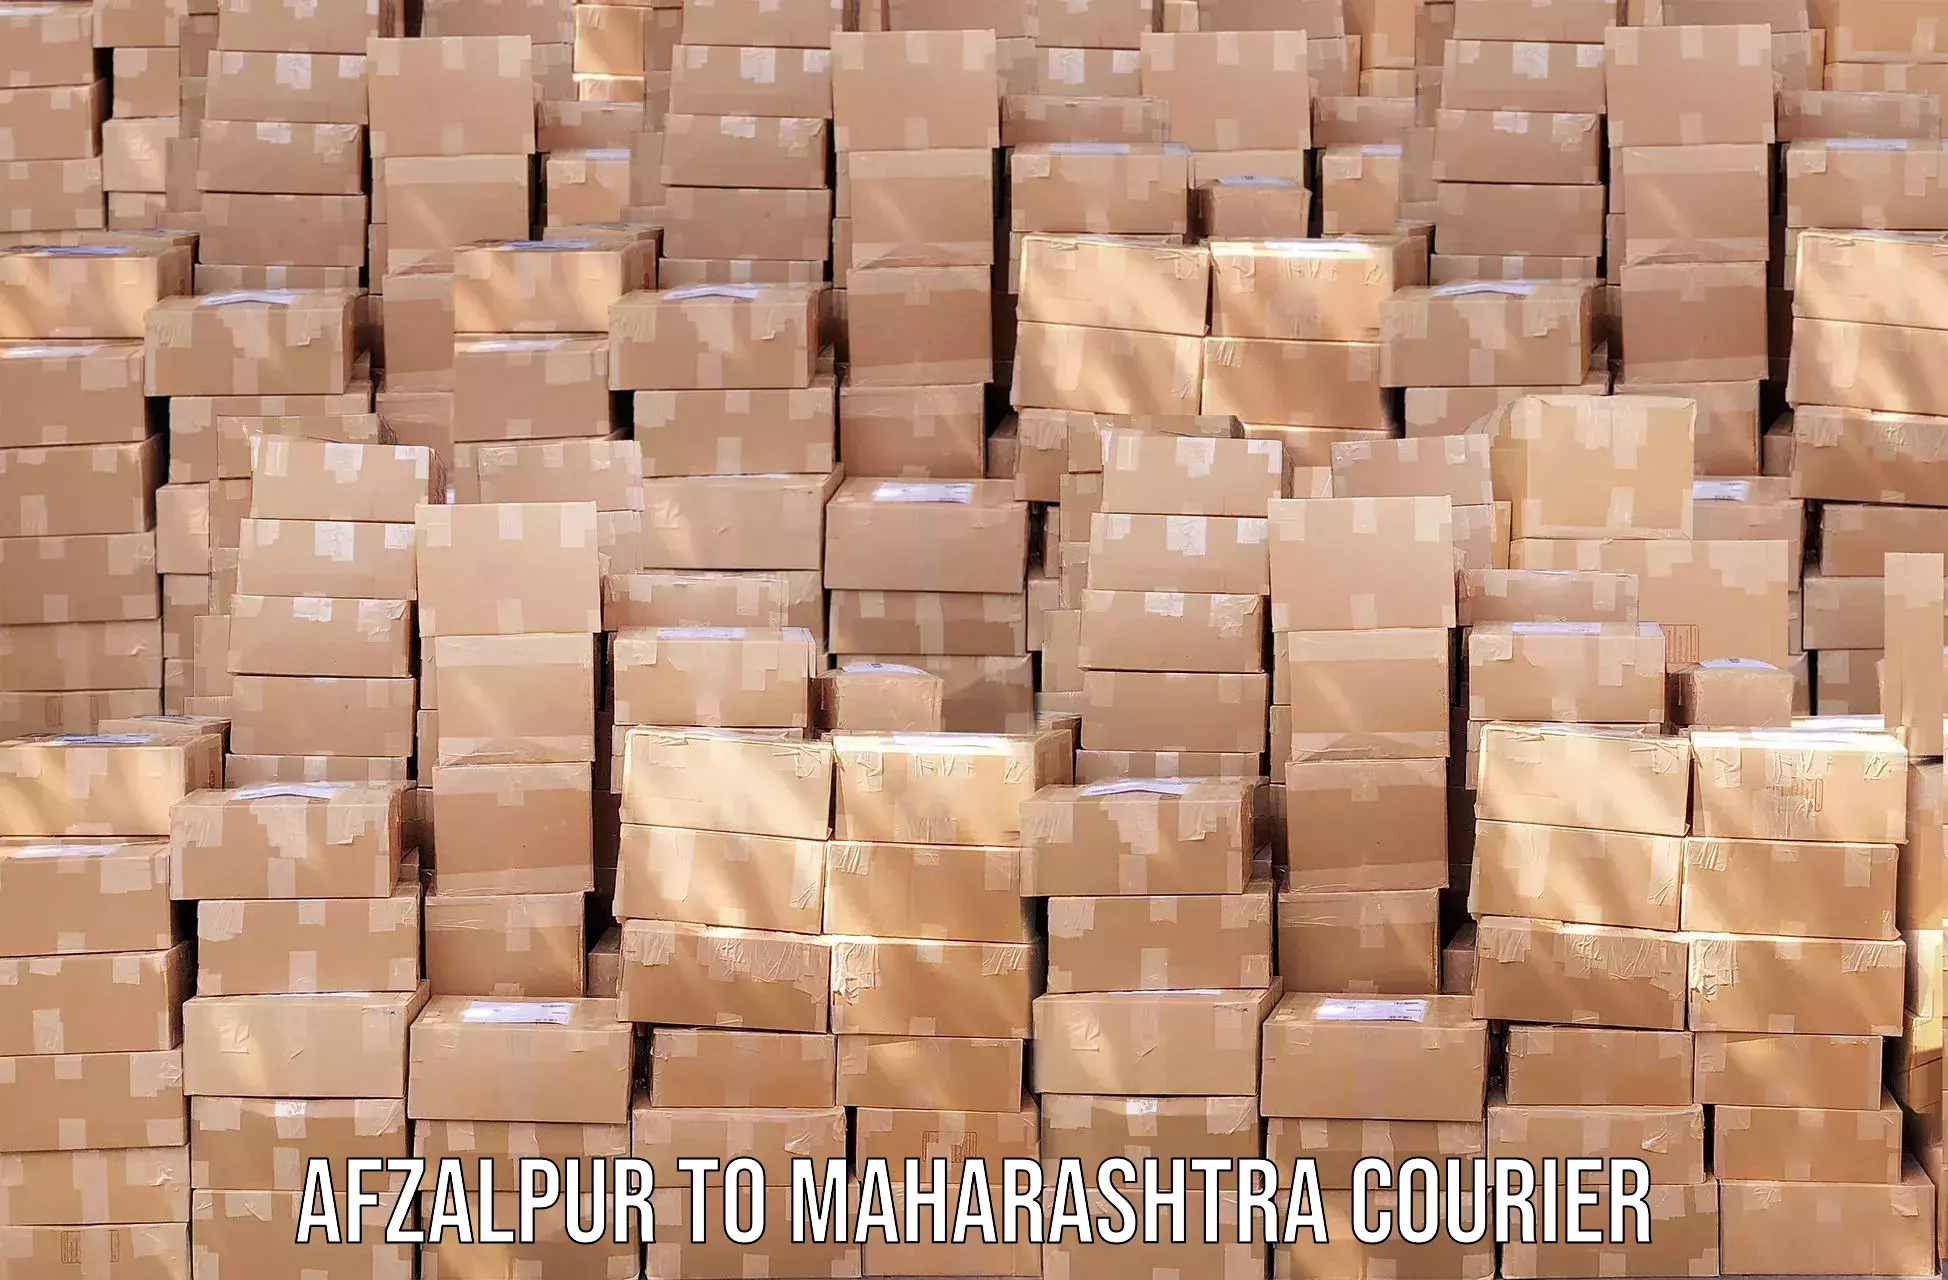 Nationwide shipping capabilities Afzalpur to Latur